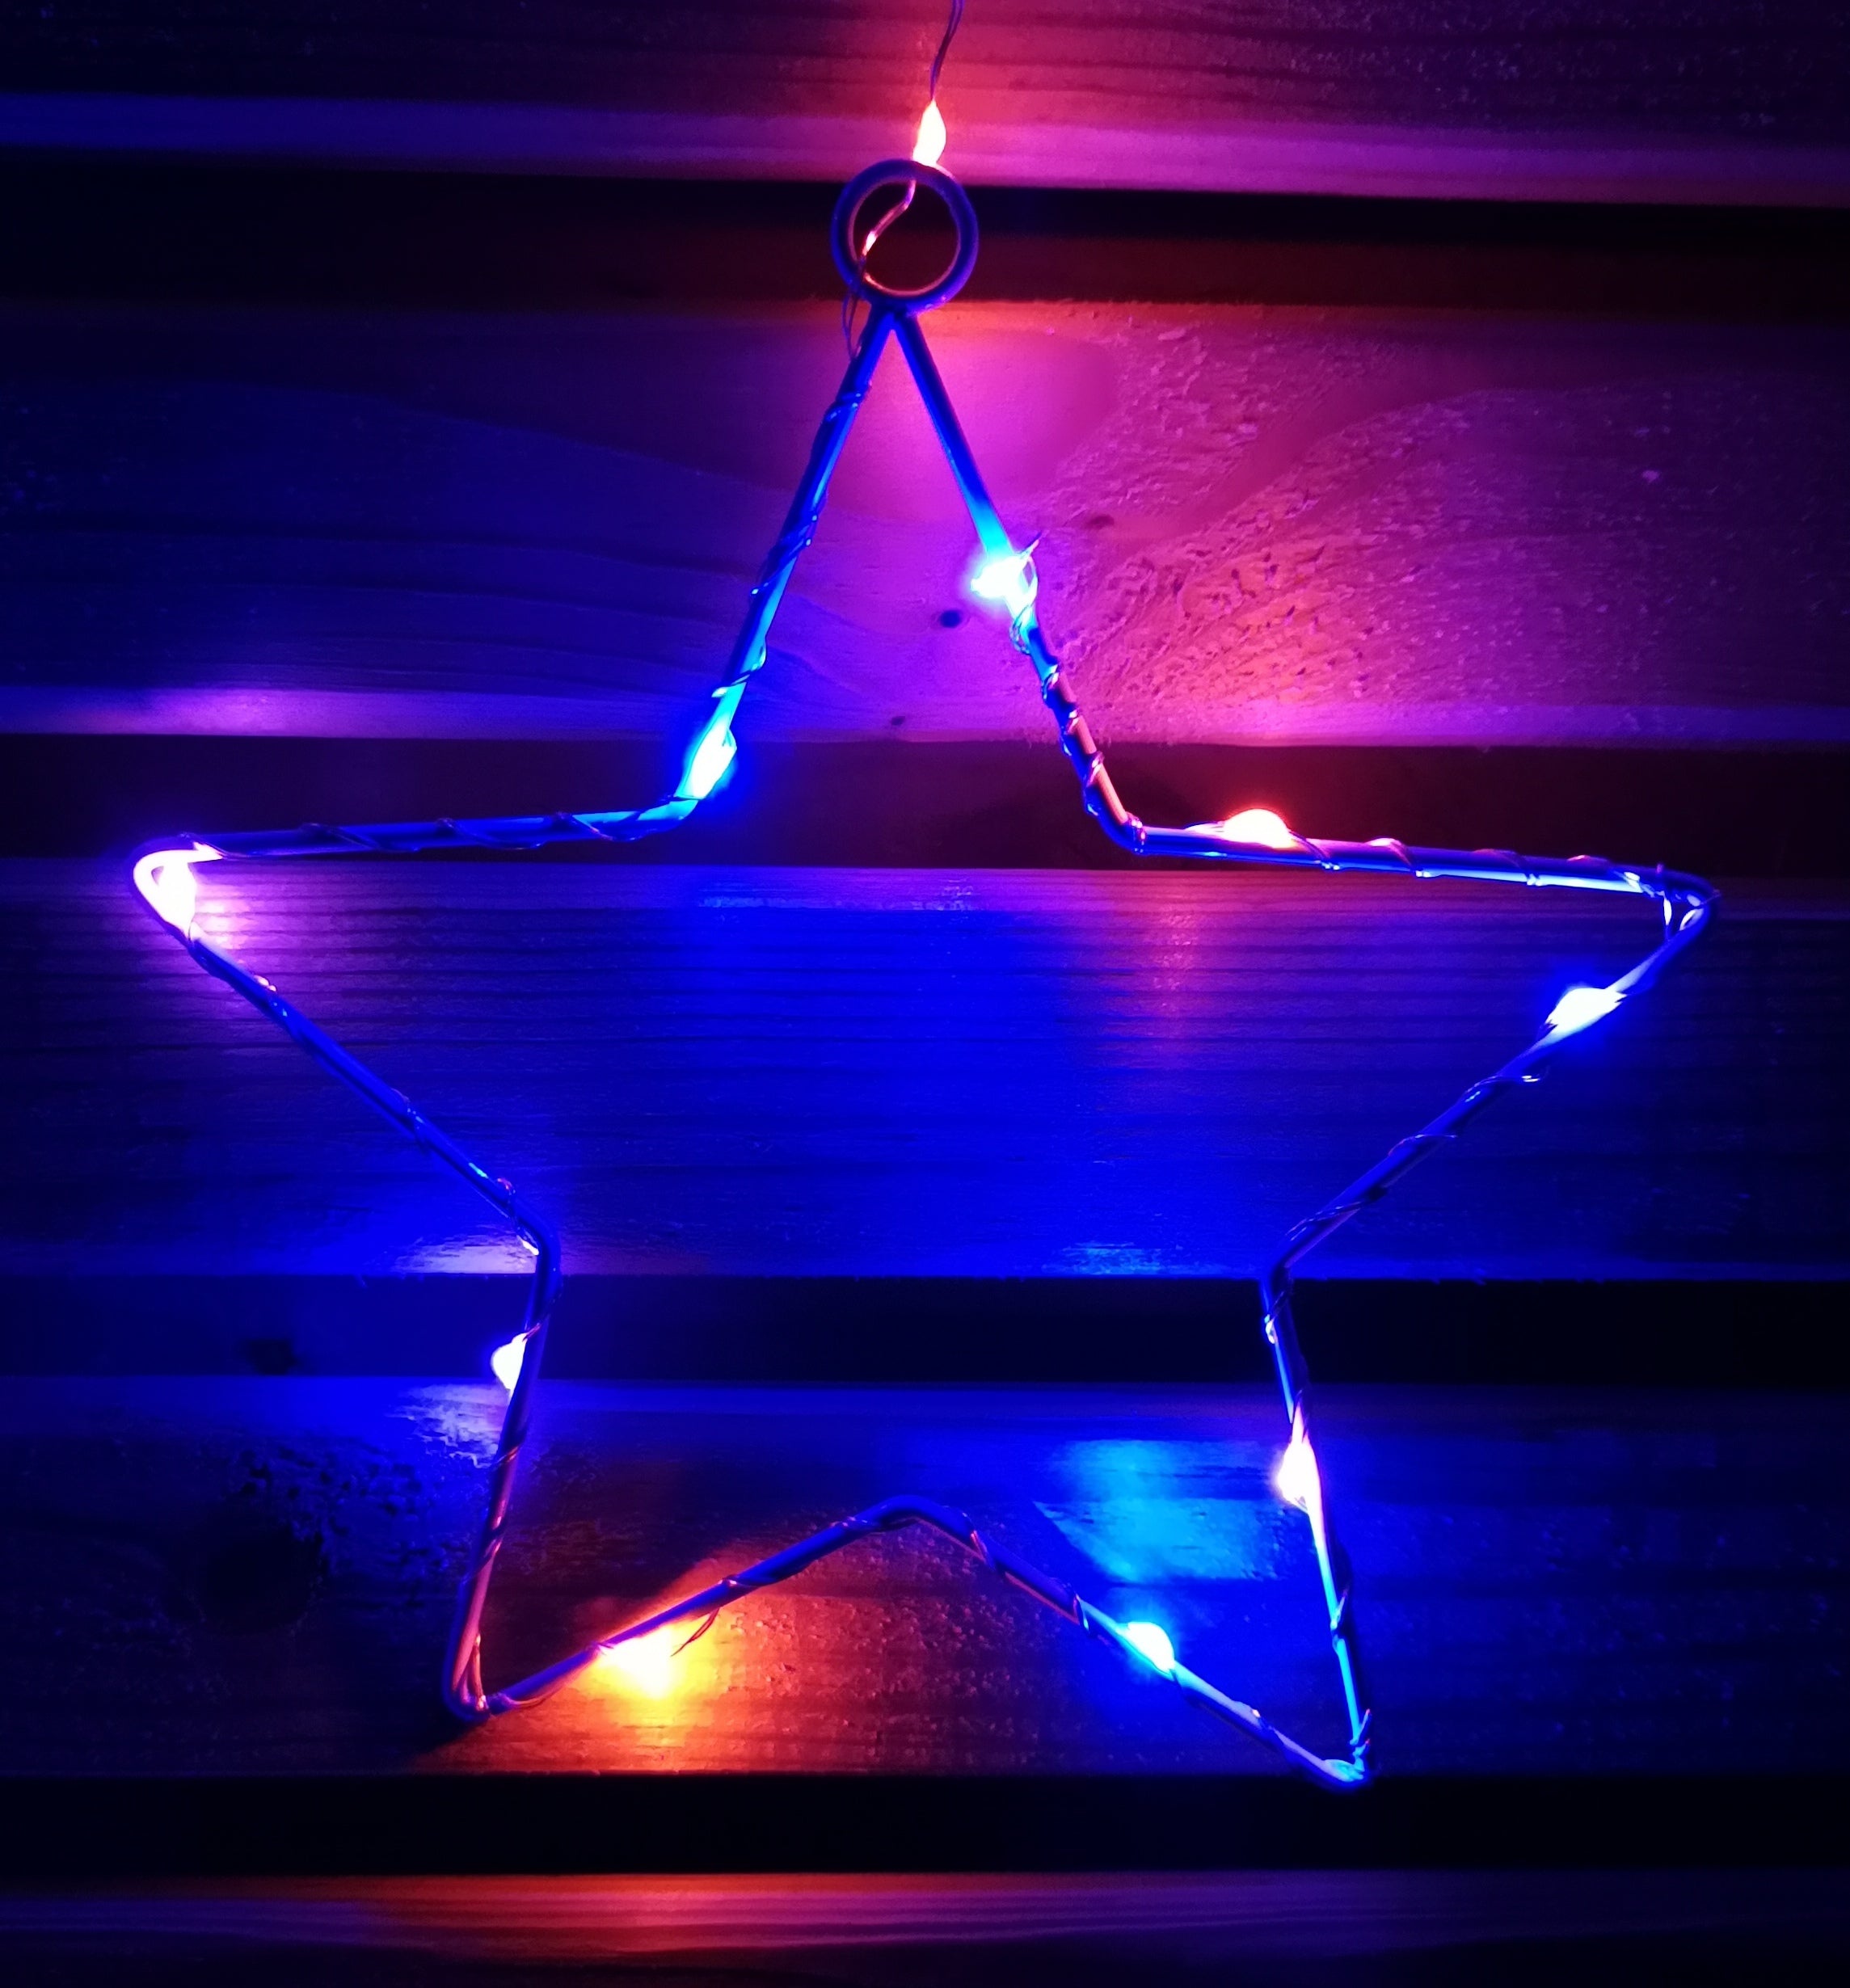 1.2m Battery Operated Christmas Star Curtain Lights with 140 Rainbow LEDs